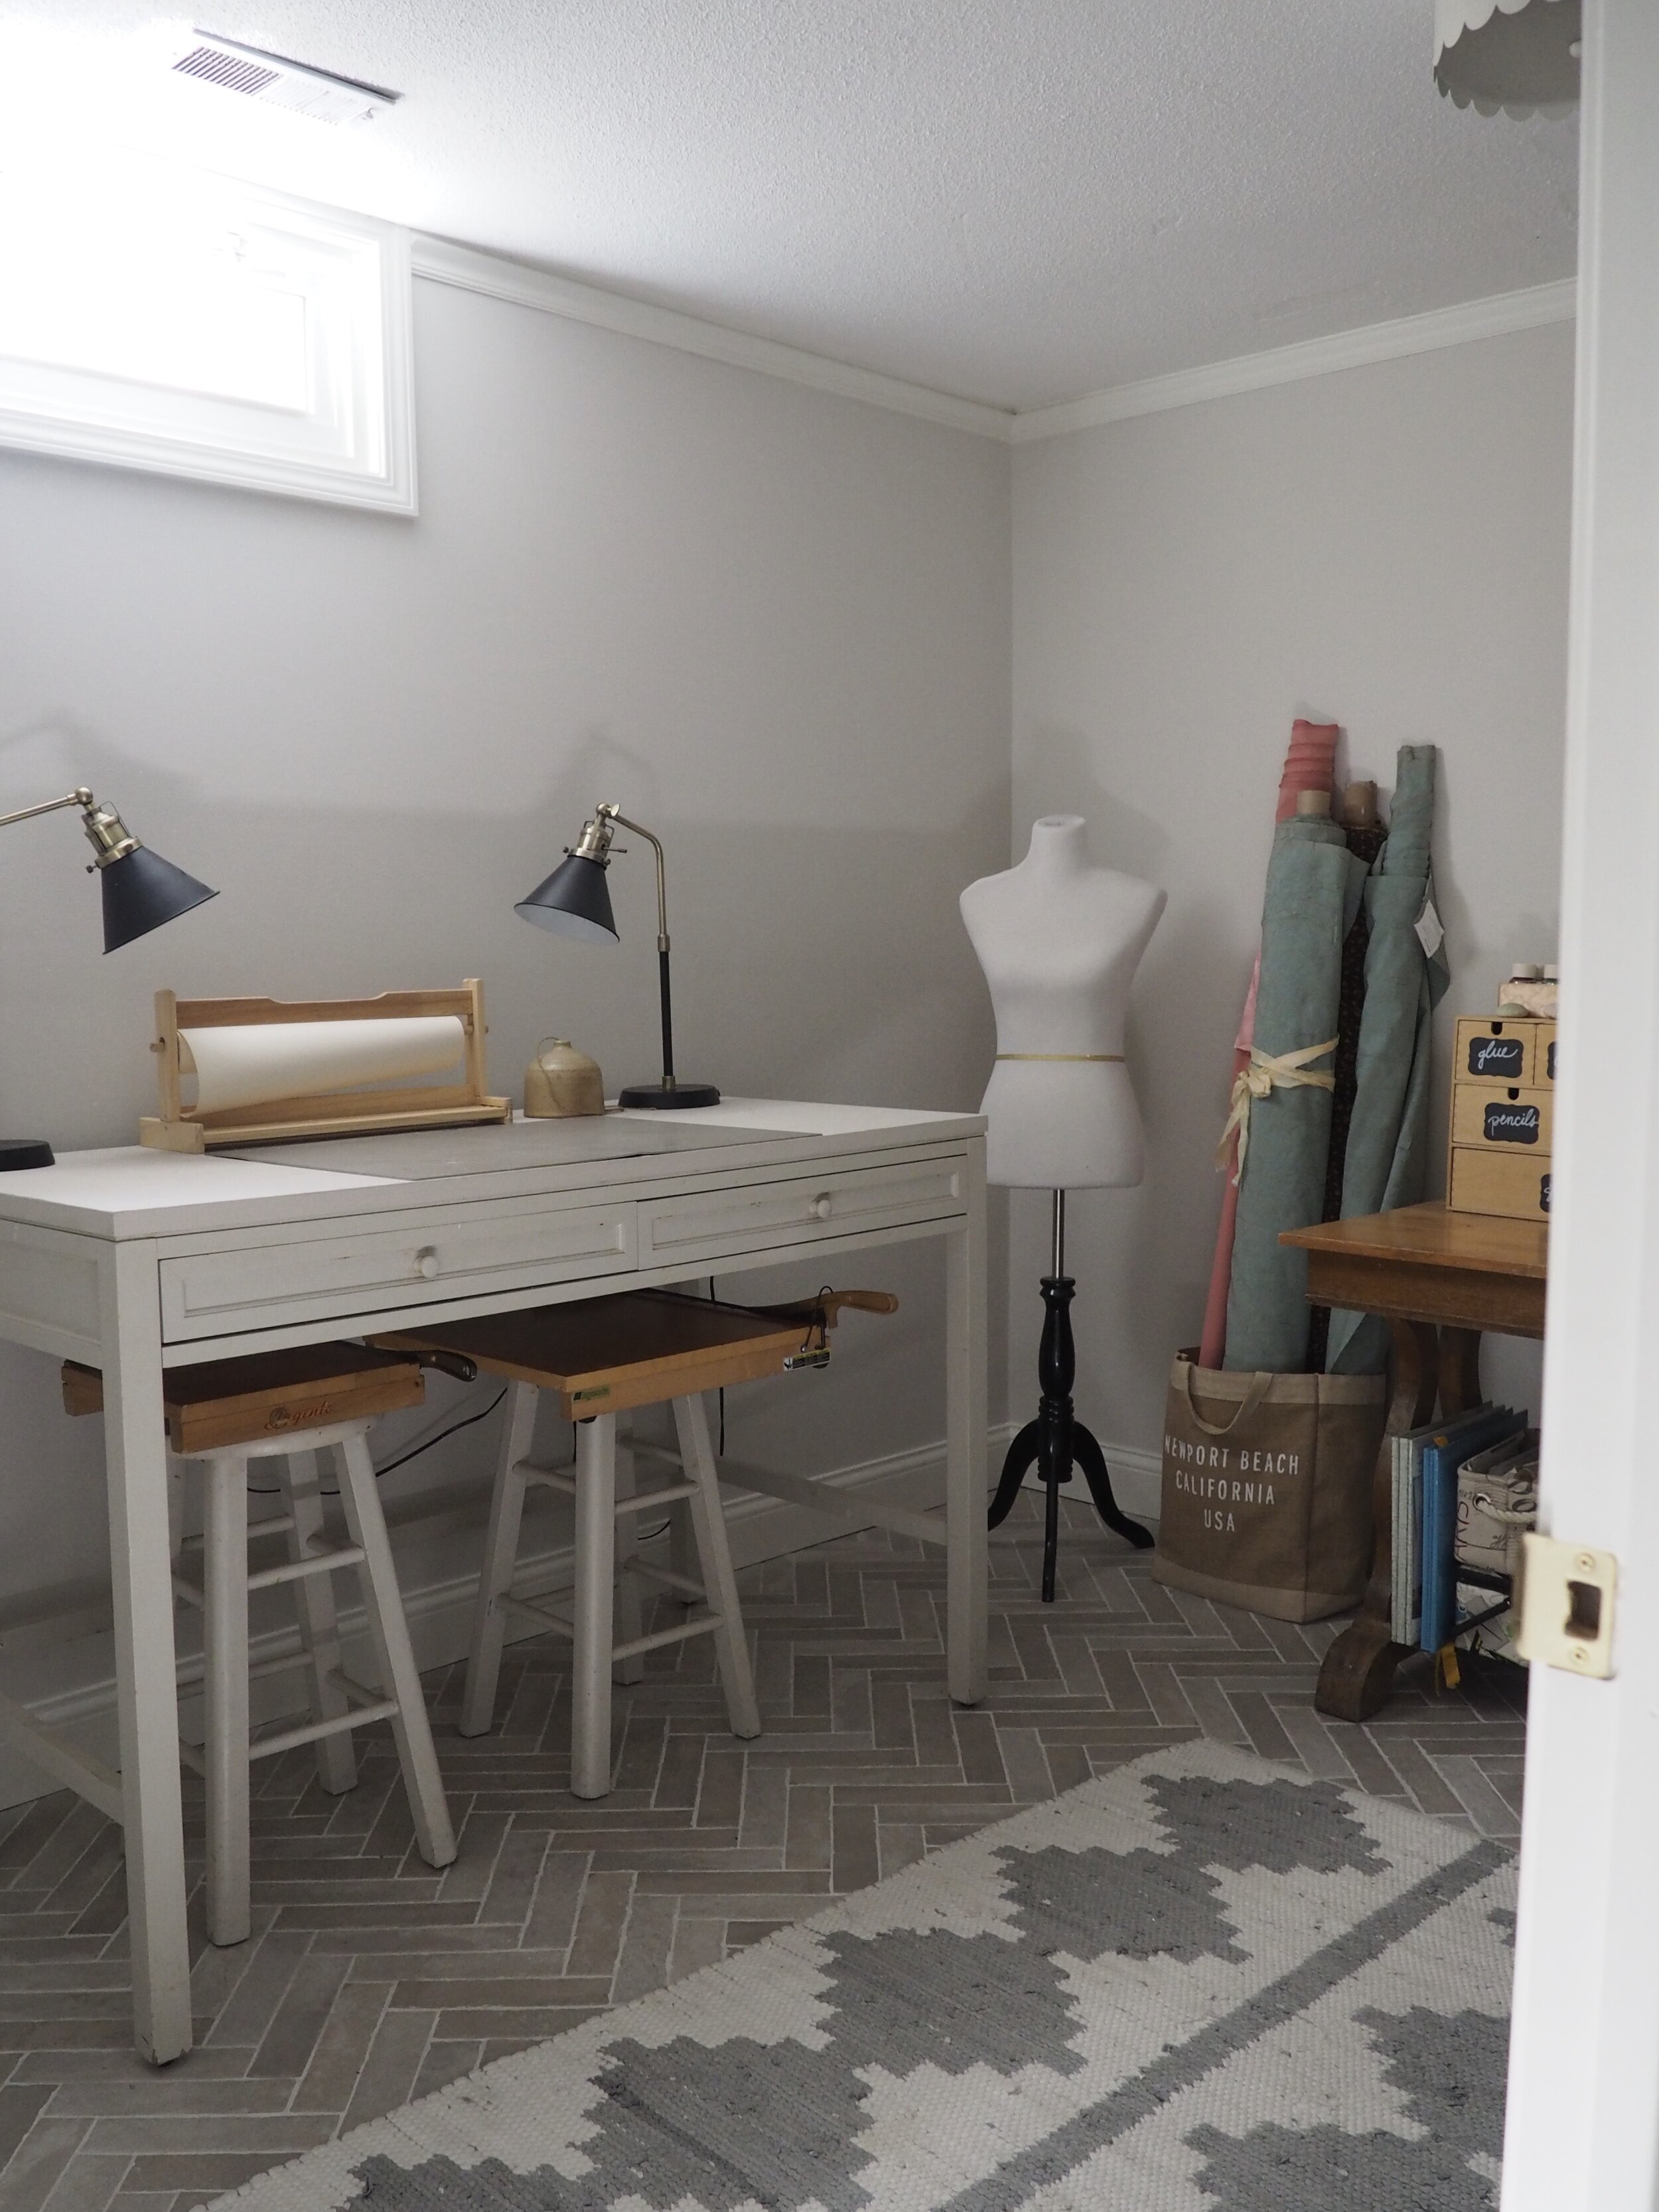 It’s so important to have a big work surface in a craft room. This one is the right height for standing with optional counter stools for a seated project. My vintage paper cutters rest on the stools when not in use.